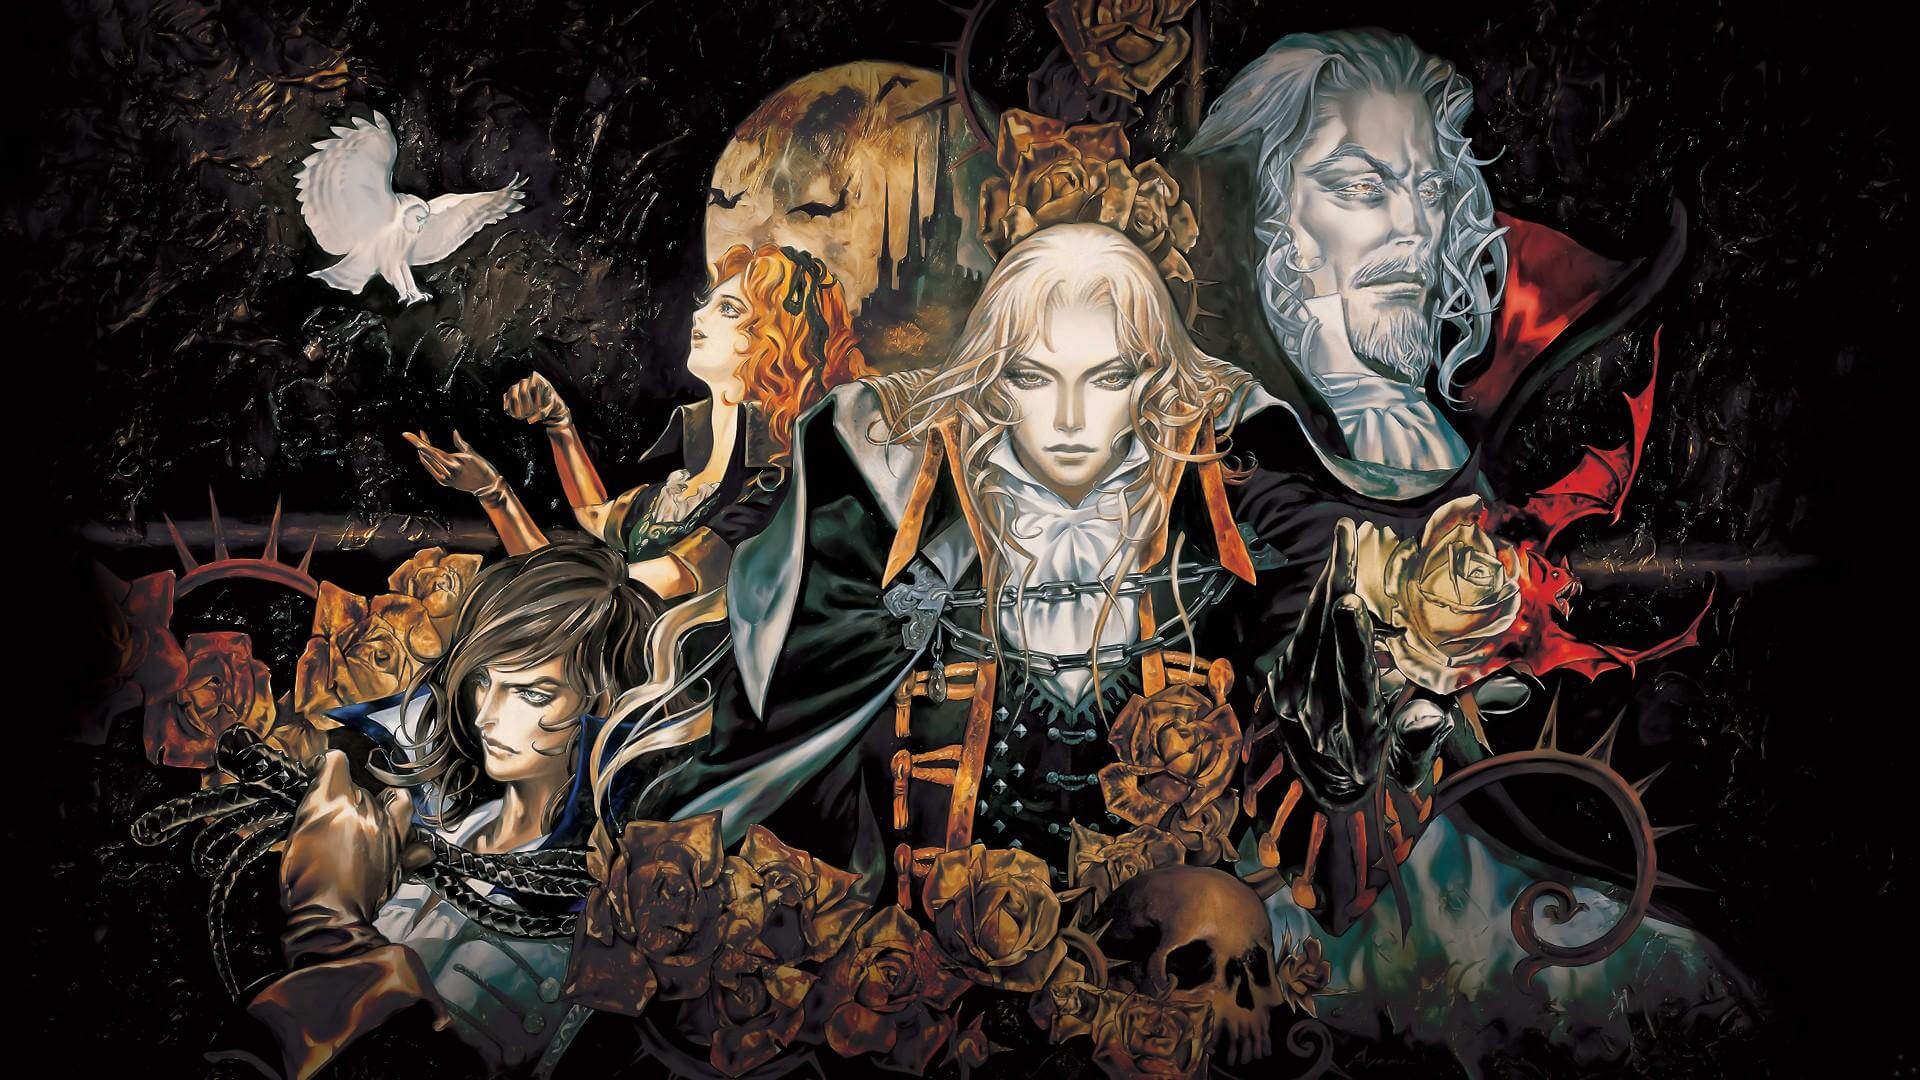 Castlevania: Lords of Shadow Guide - IGN